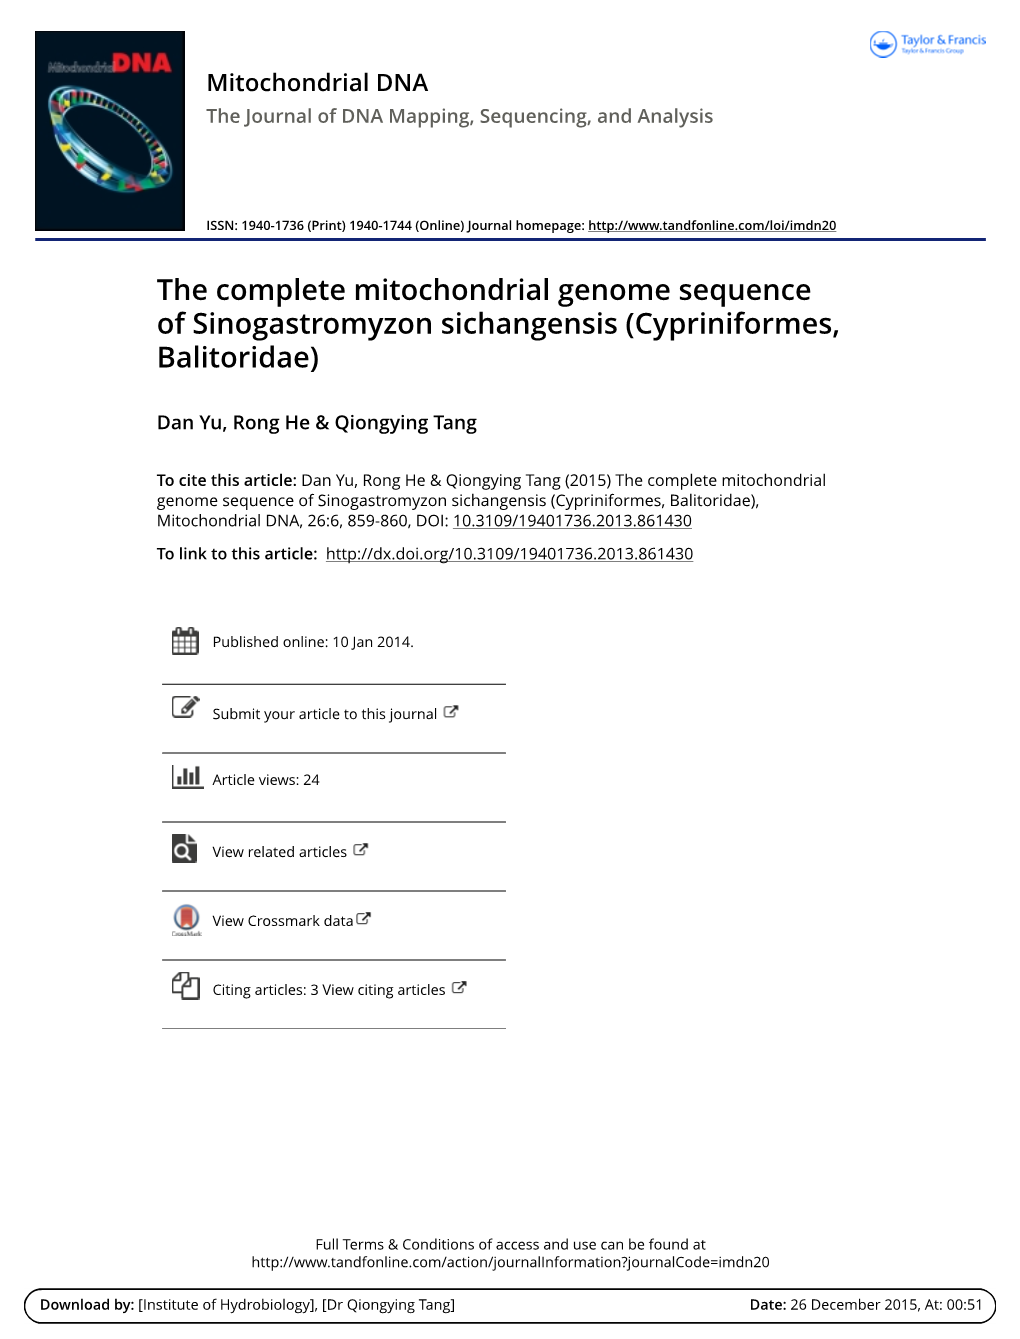 The Complete Mitochondrial Genome Sequence of Sinogastromyzon Sichangensis (Cypriniformes, Balitoridae)